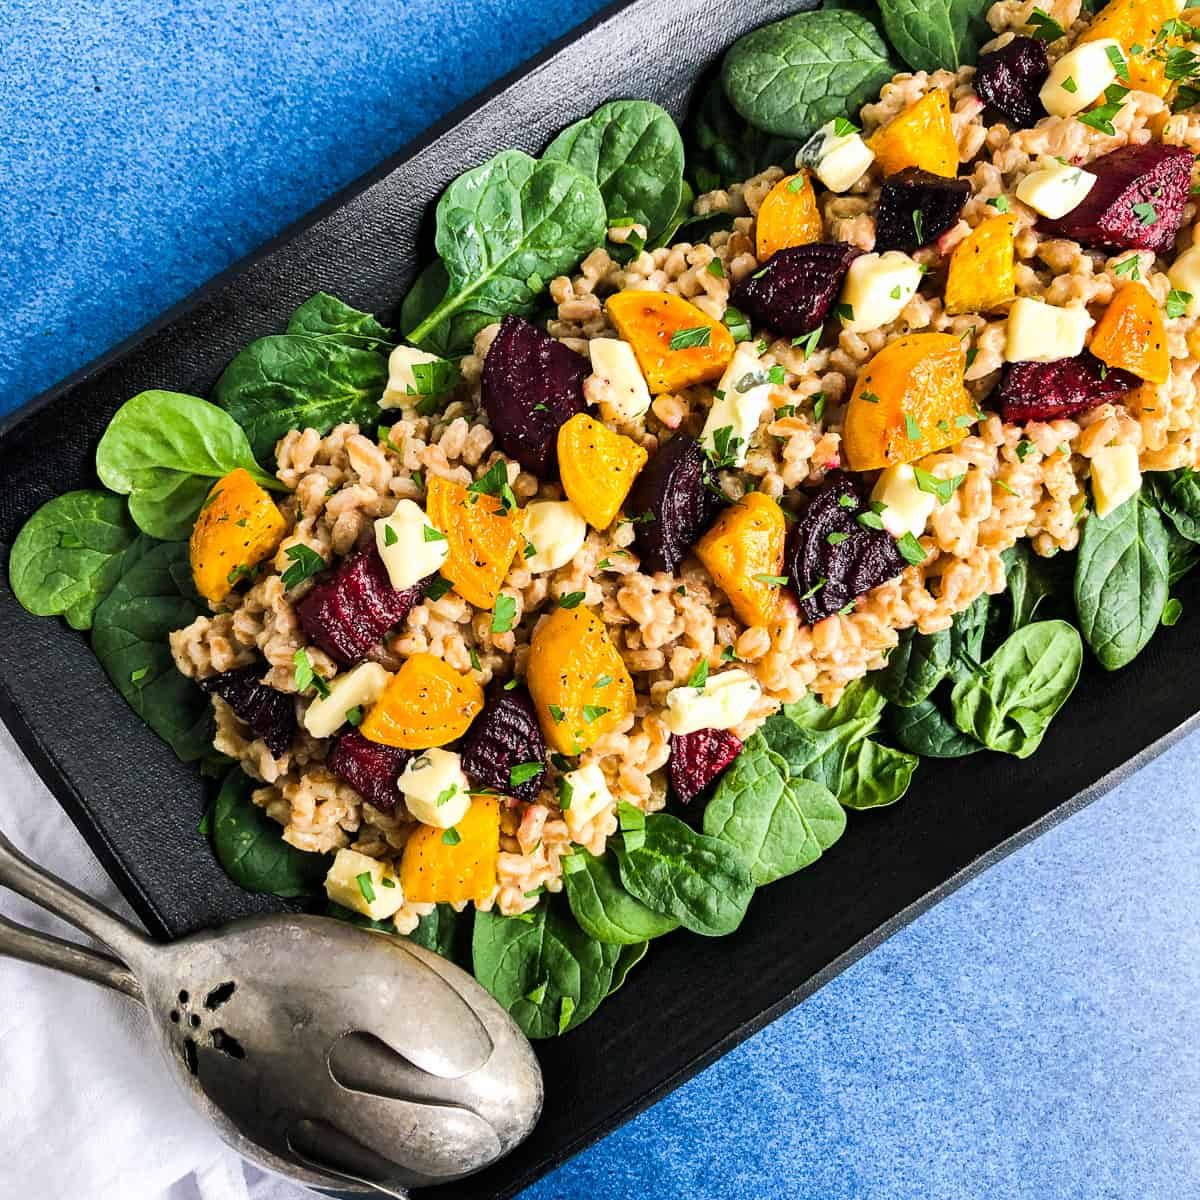 Overhead view of Farro Salad plated over spinach and topped with roasted beets and cambozola cheese.